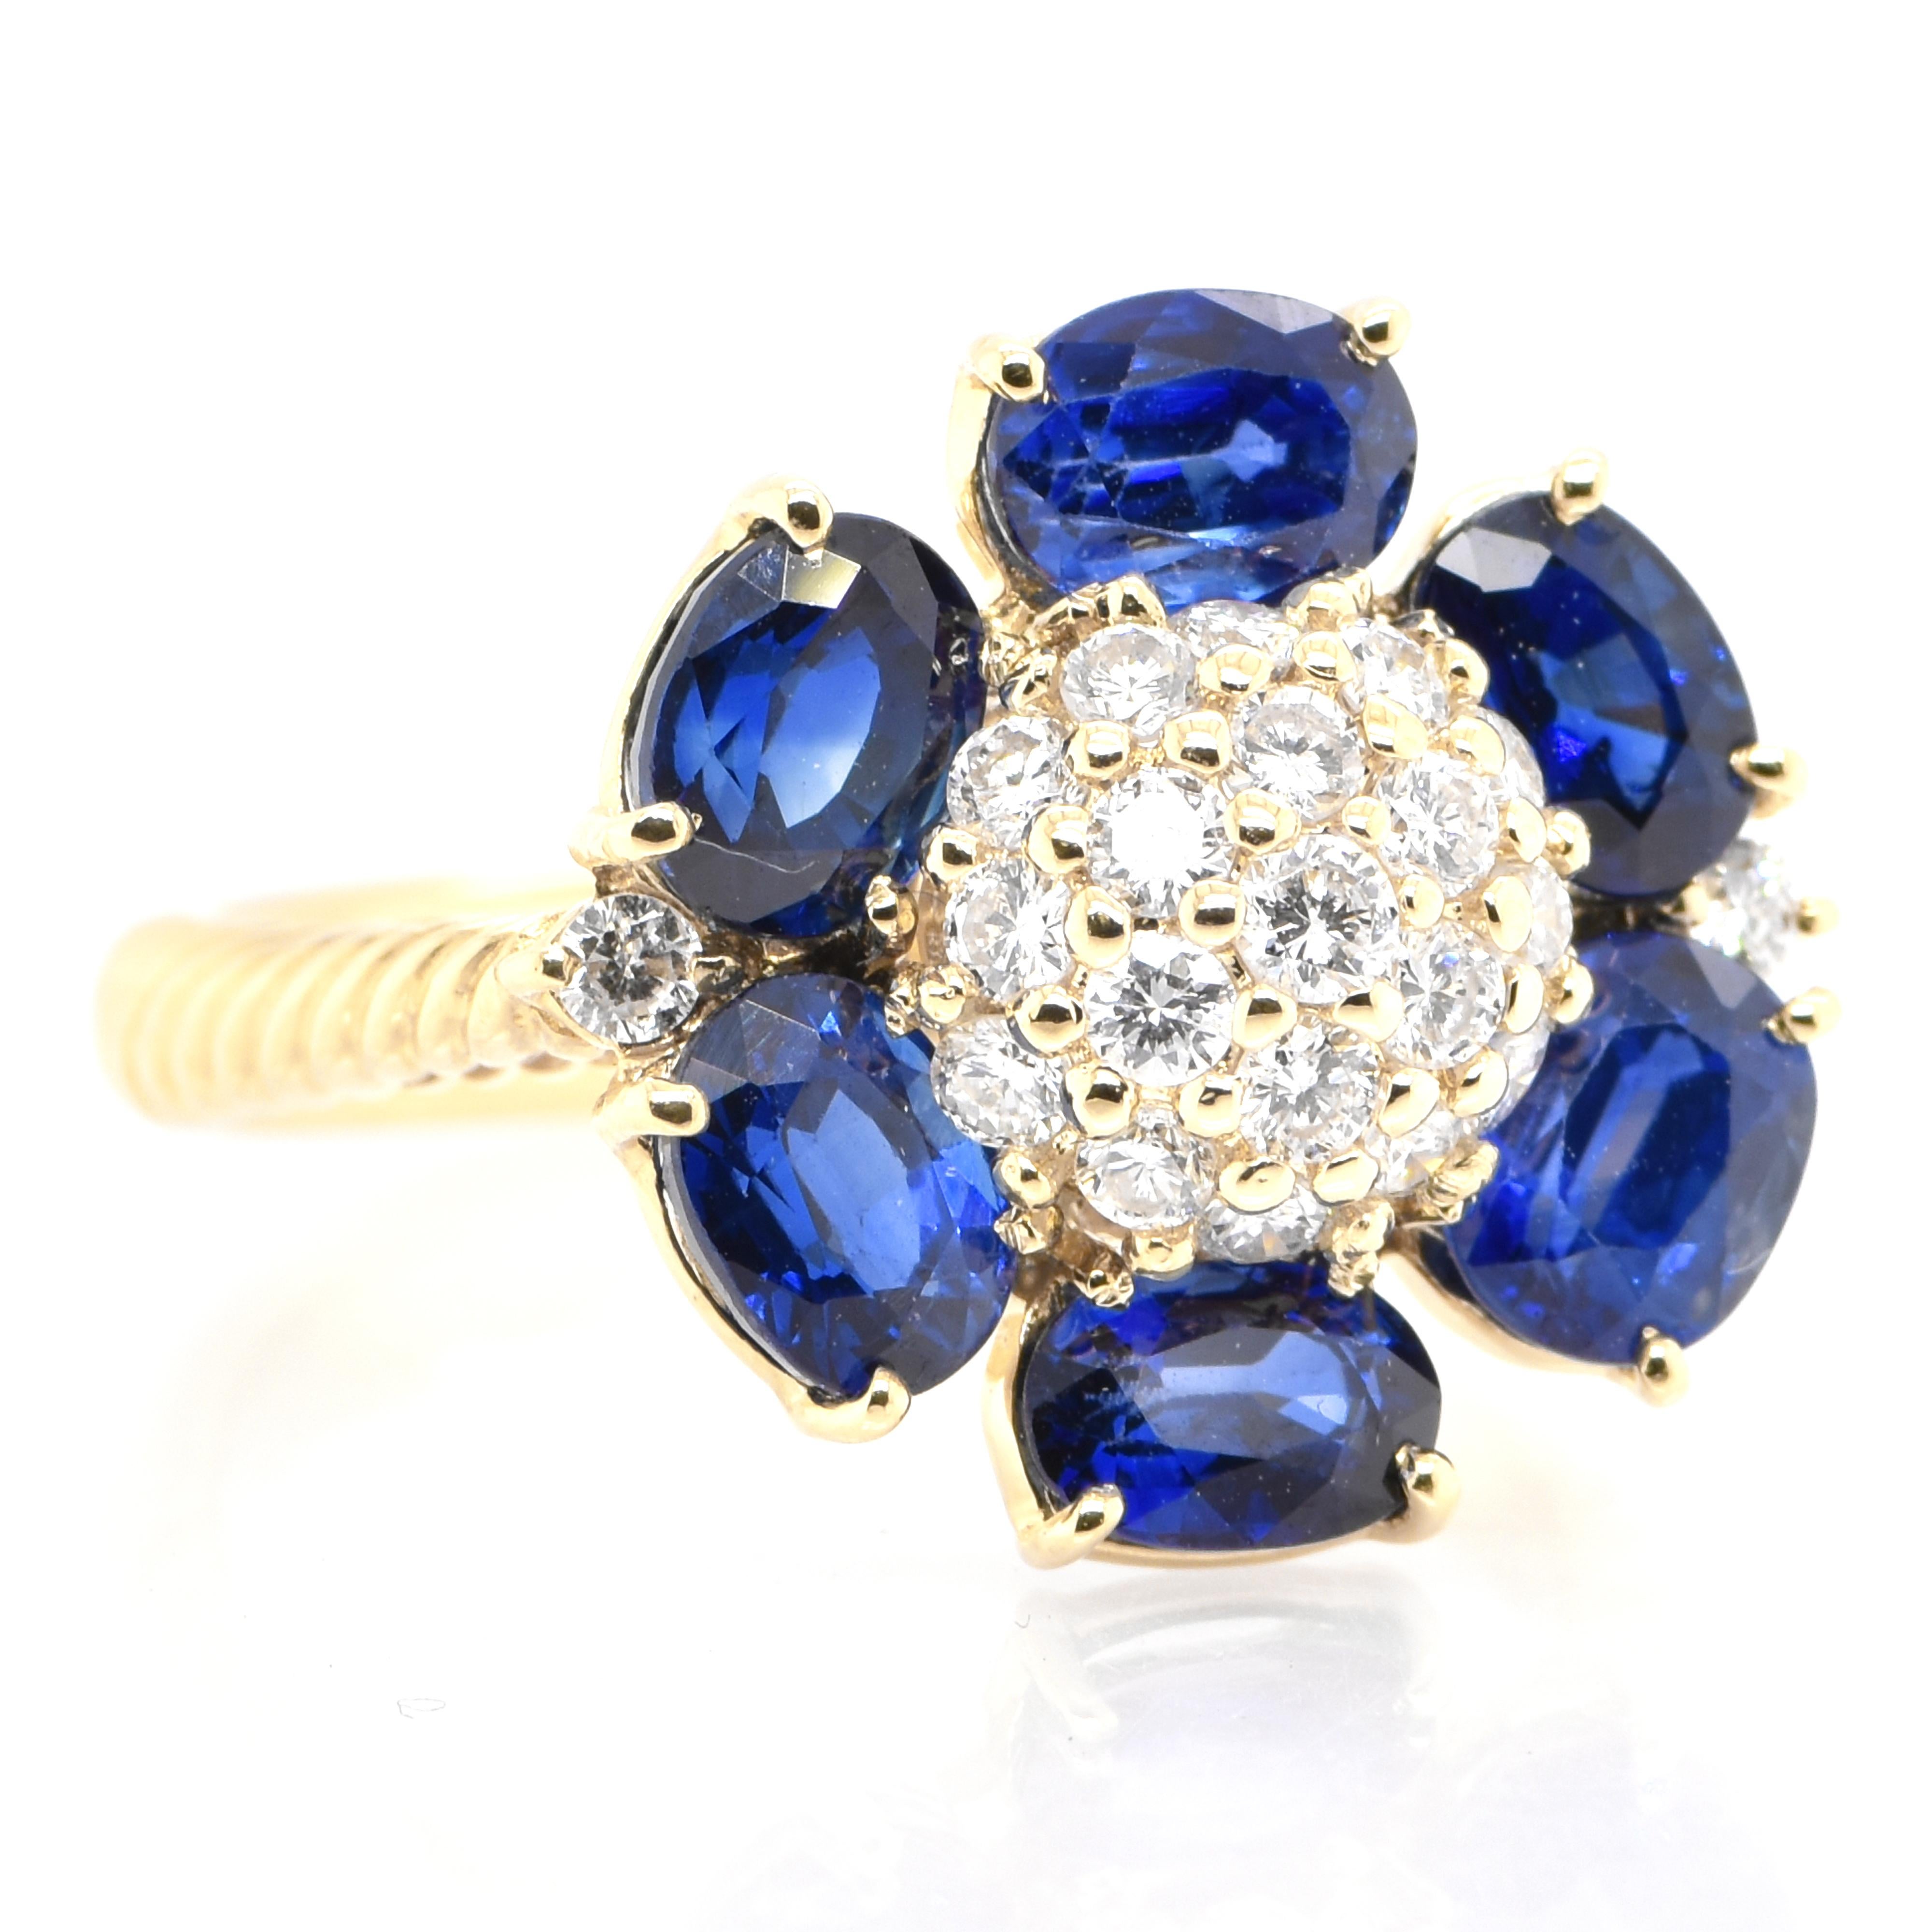 Modern 3.46 Carat Natural Sapphire and Diamond Cluster Ring Set in 18K Yellow Gold For Sale